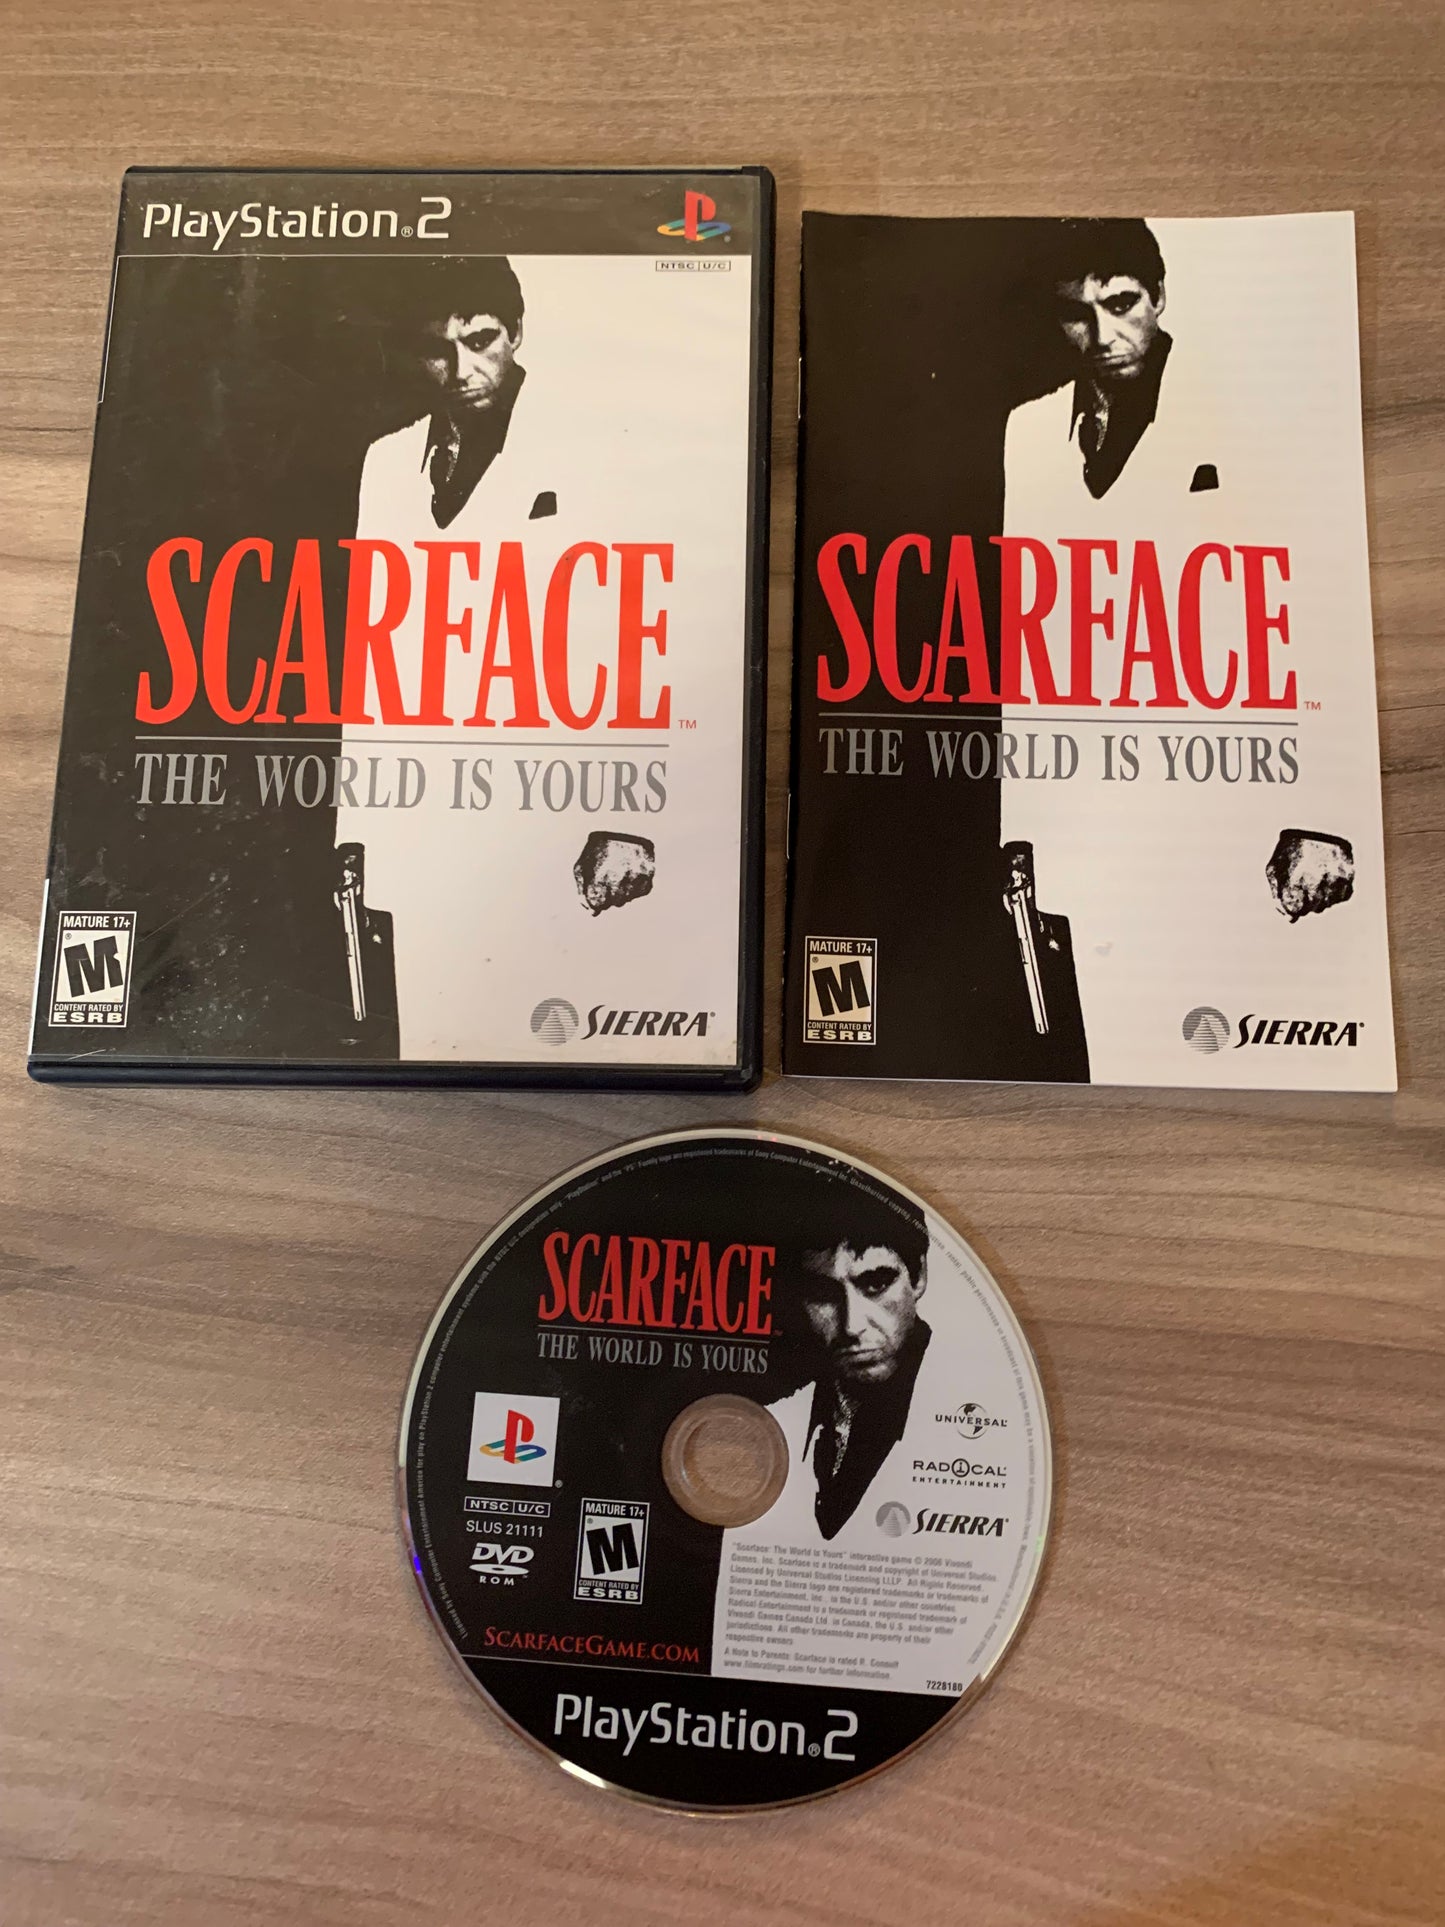 PiXEL-RETRO.COM : SONY PLAYSTATION 2 (PS2) COMPLET CIB BOX MANUAL GAME NTSC SCARFACE THE WORLD IS YOURS